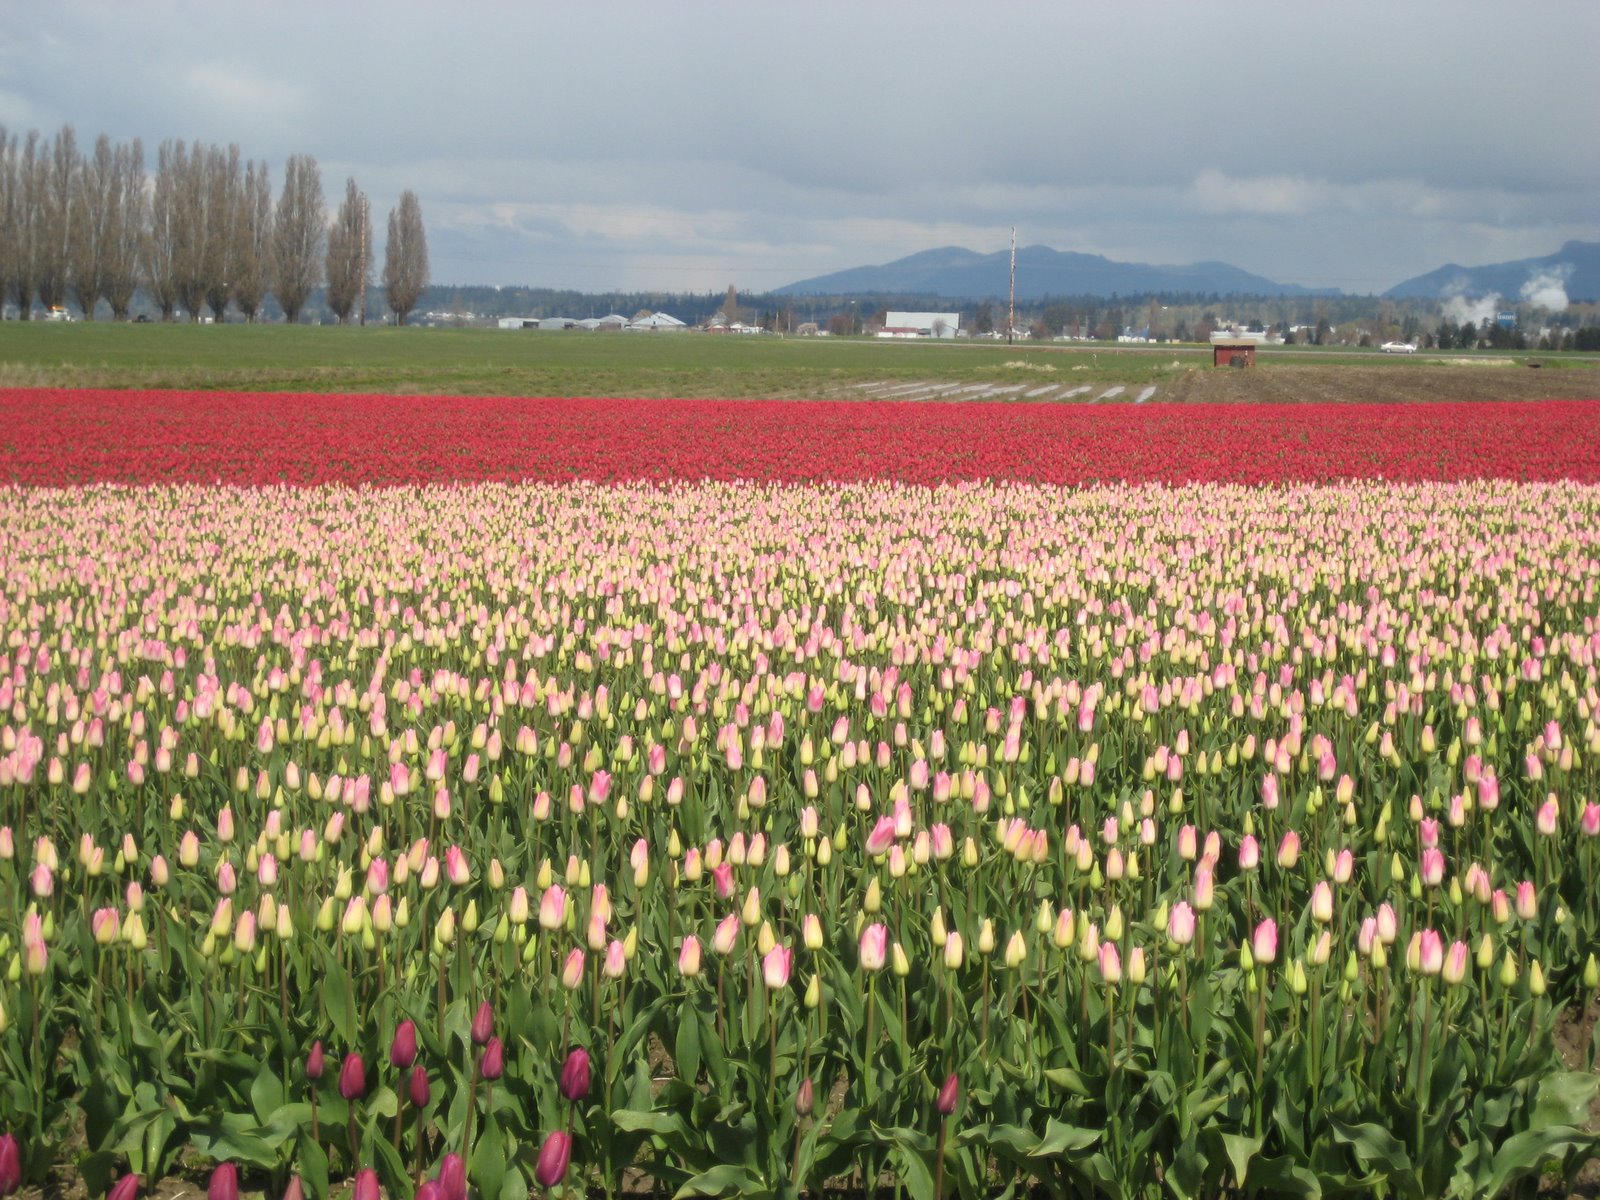 Enjoy.  I took this photo at a Tulip Festival outside of Seattle.